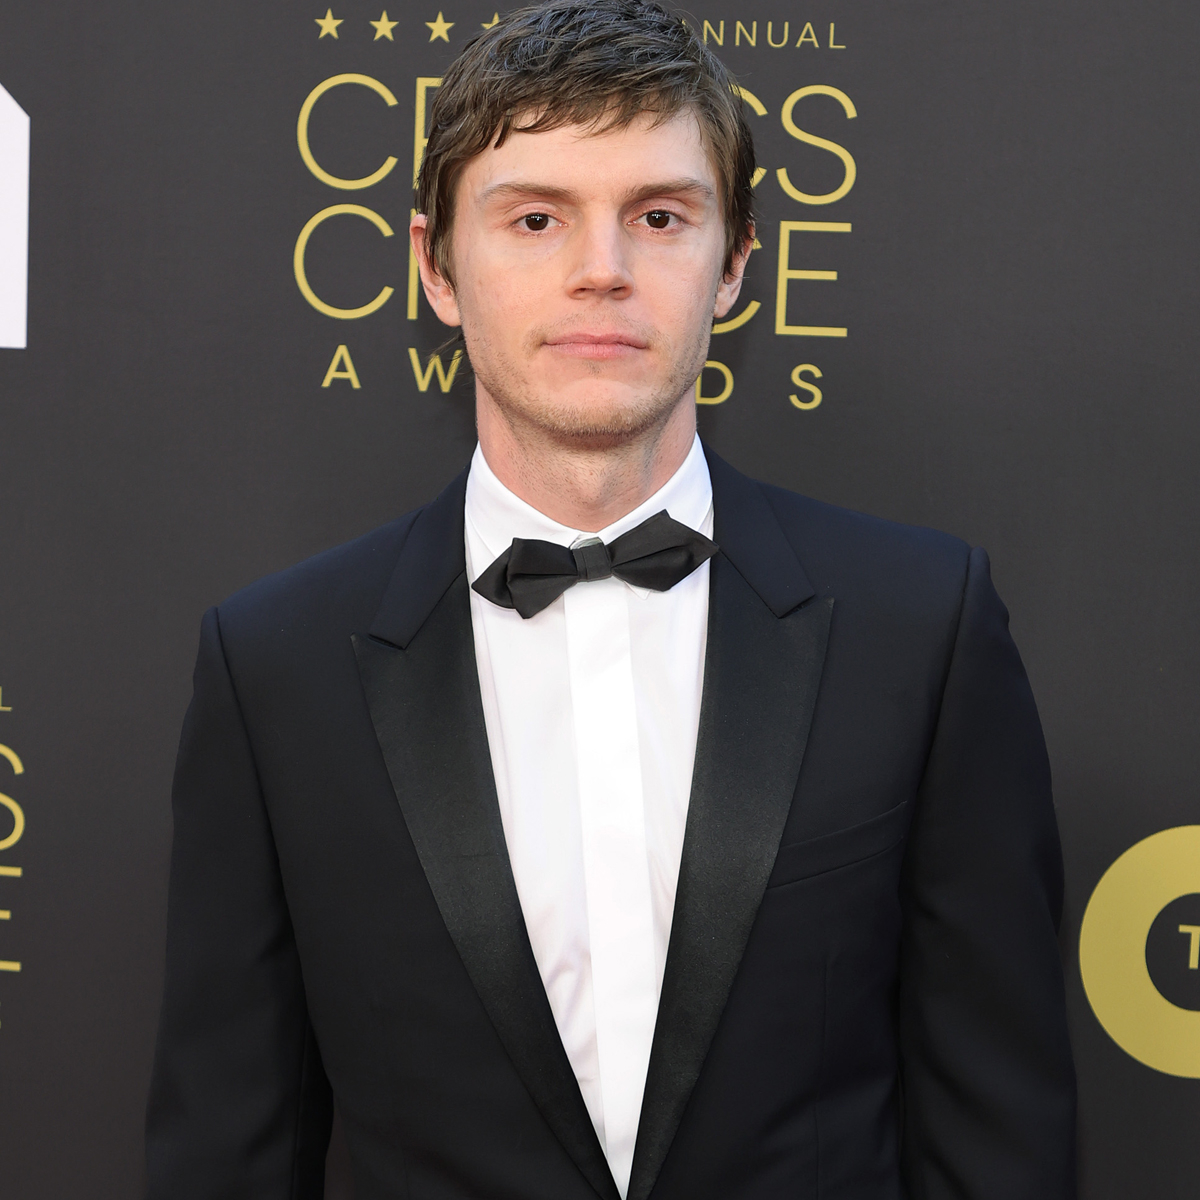 Jeffrey Dahmer 30 Years Later: From Evan Peters' Portrayal to